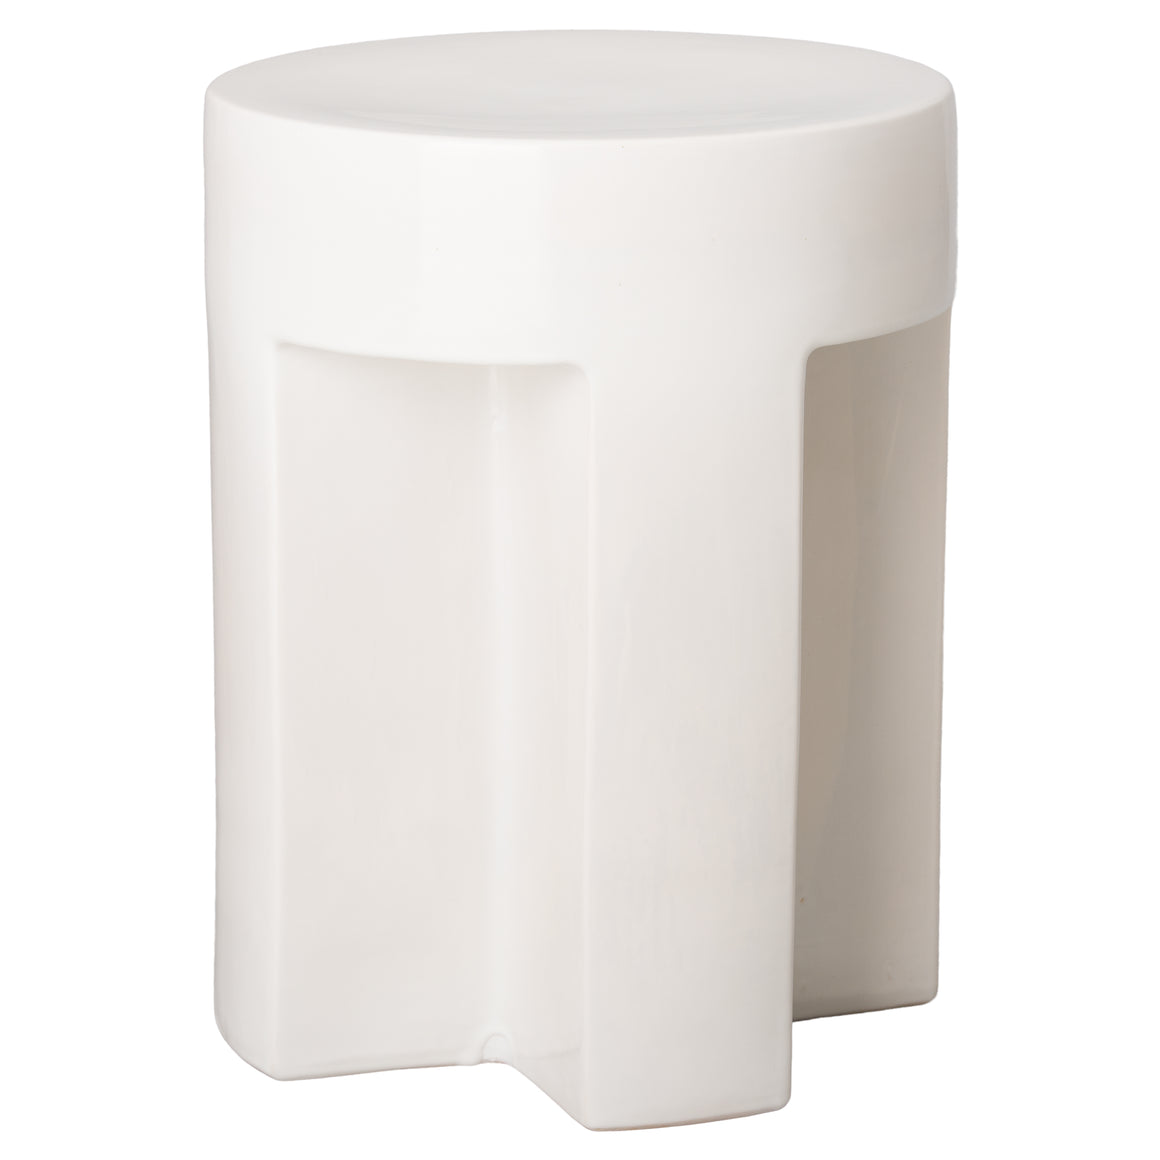 Large TX Ceramic Garden Stool/Table with a White Glaze